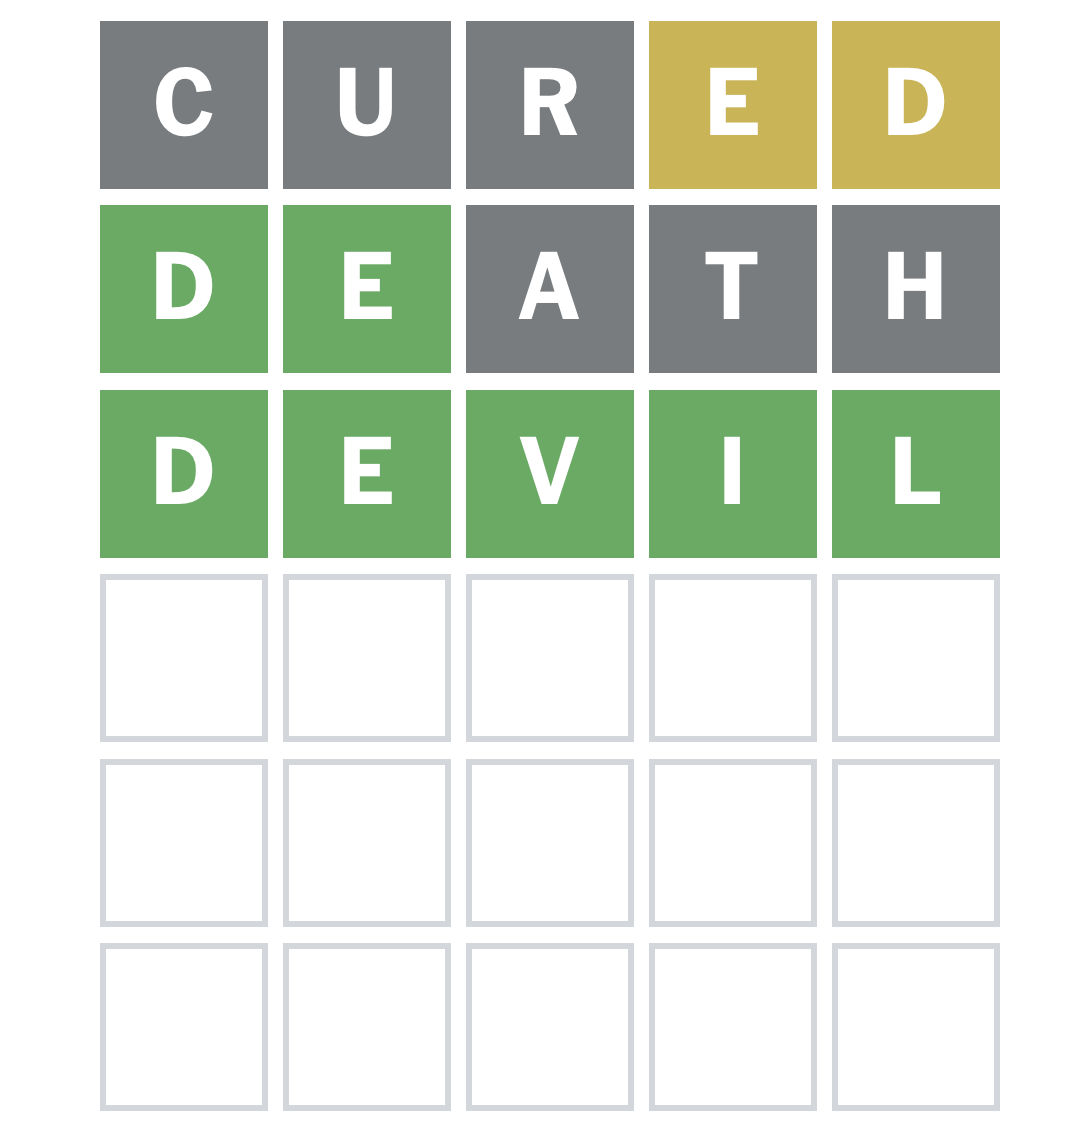 A wordl screenshot with the words: cured, death, devil